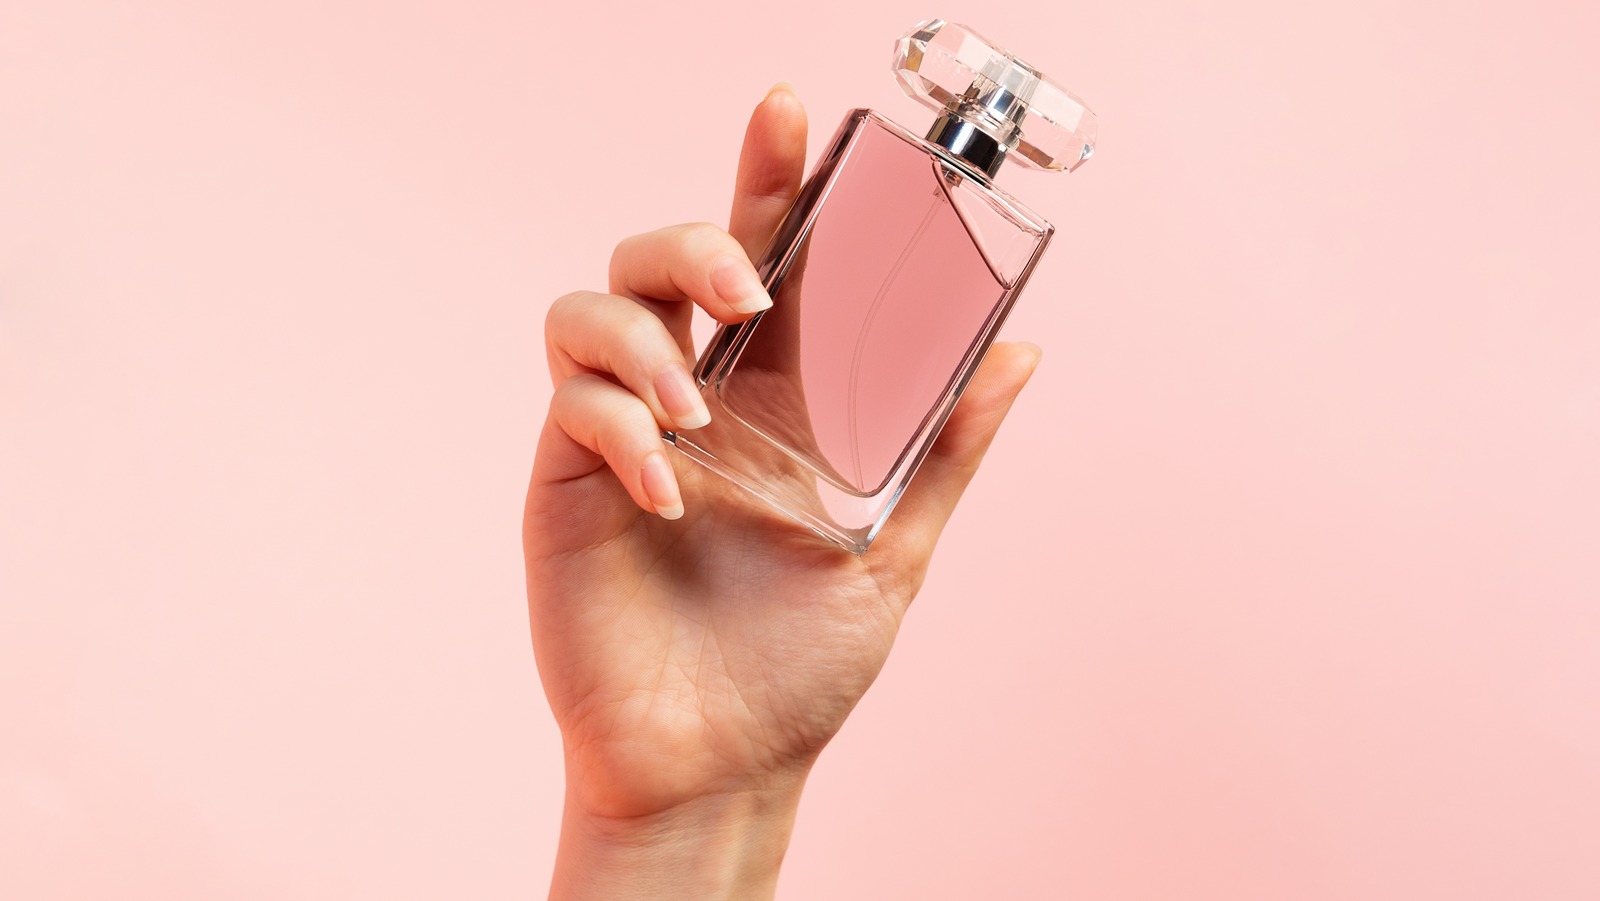 What's Your Favorite Perfume?